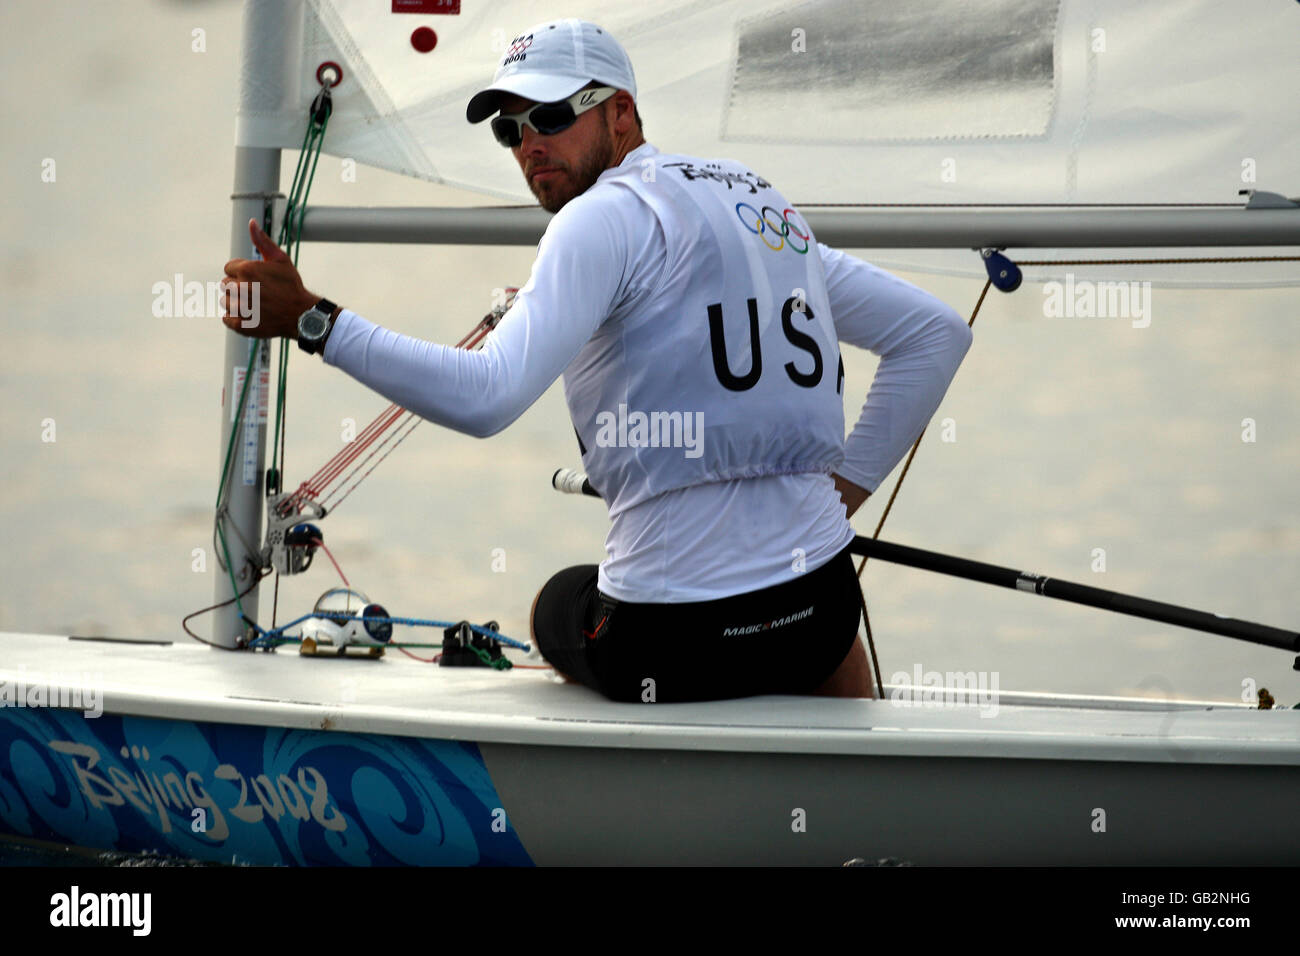 Olympics - Beijing Olympic Games 2008 - Day Five. USA's andrew Campbell wins the third round of the Laser during today's events on the water in the Beijing Olympic regatta off Qingdao. Stock Photo